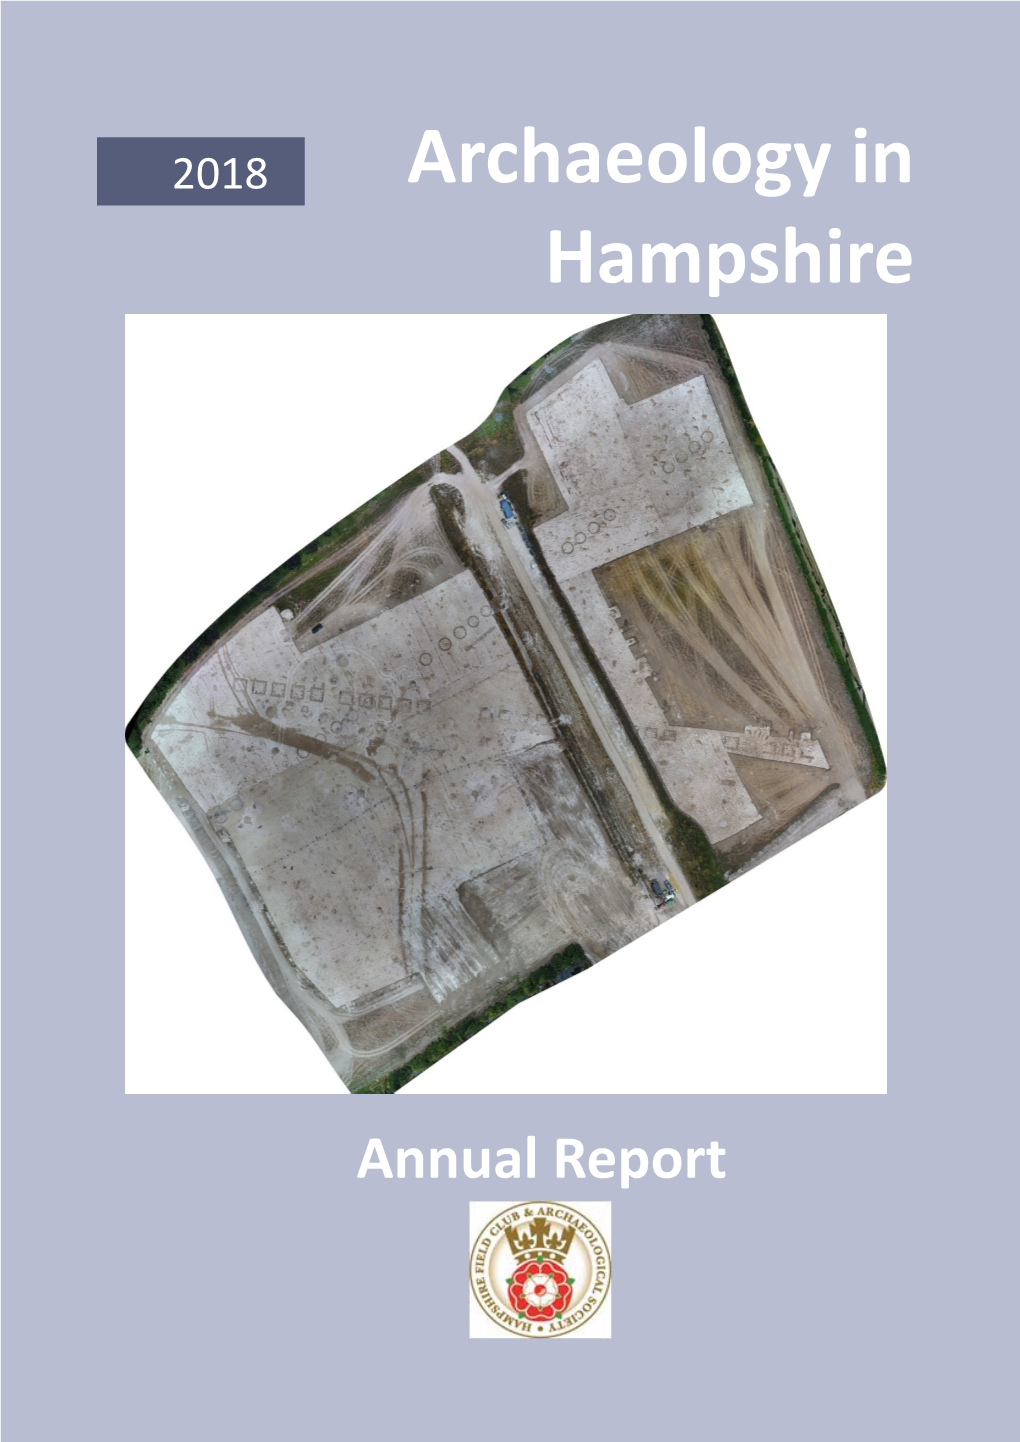 Archaeology in Hampshire for 2018